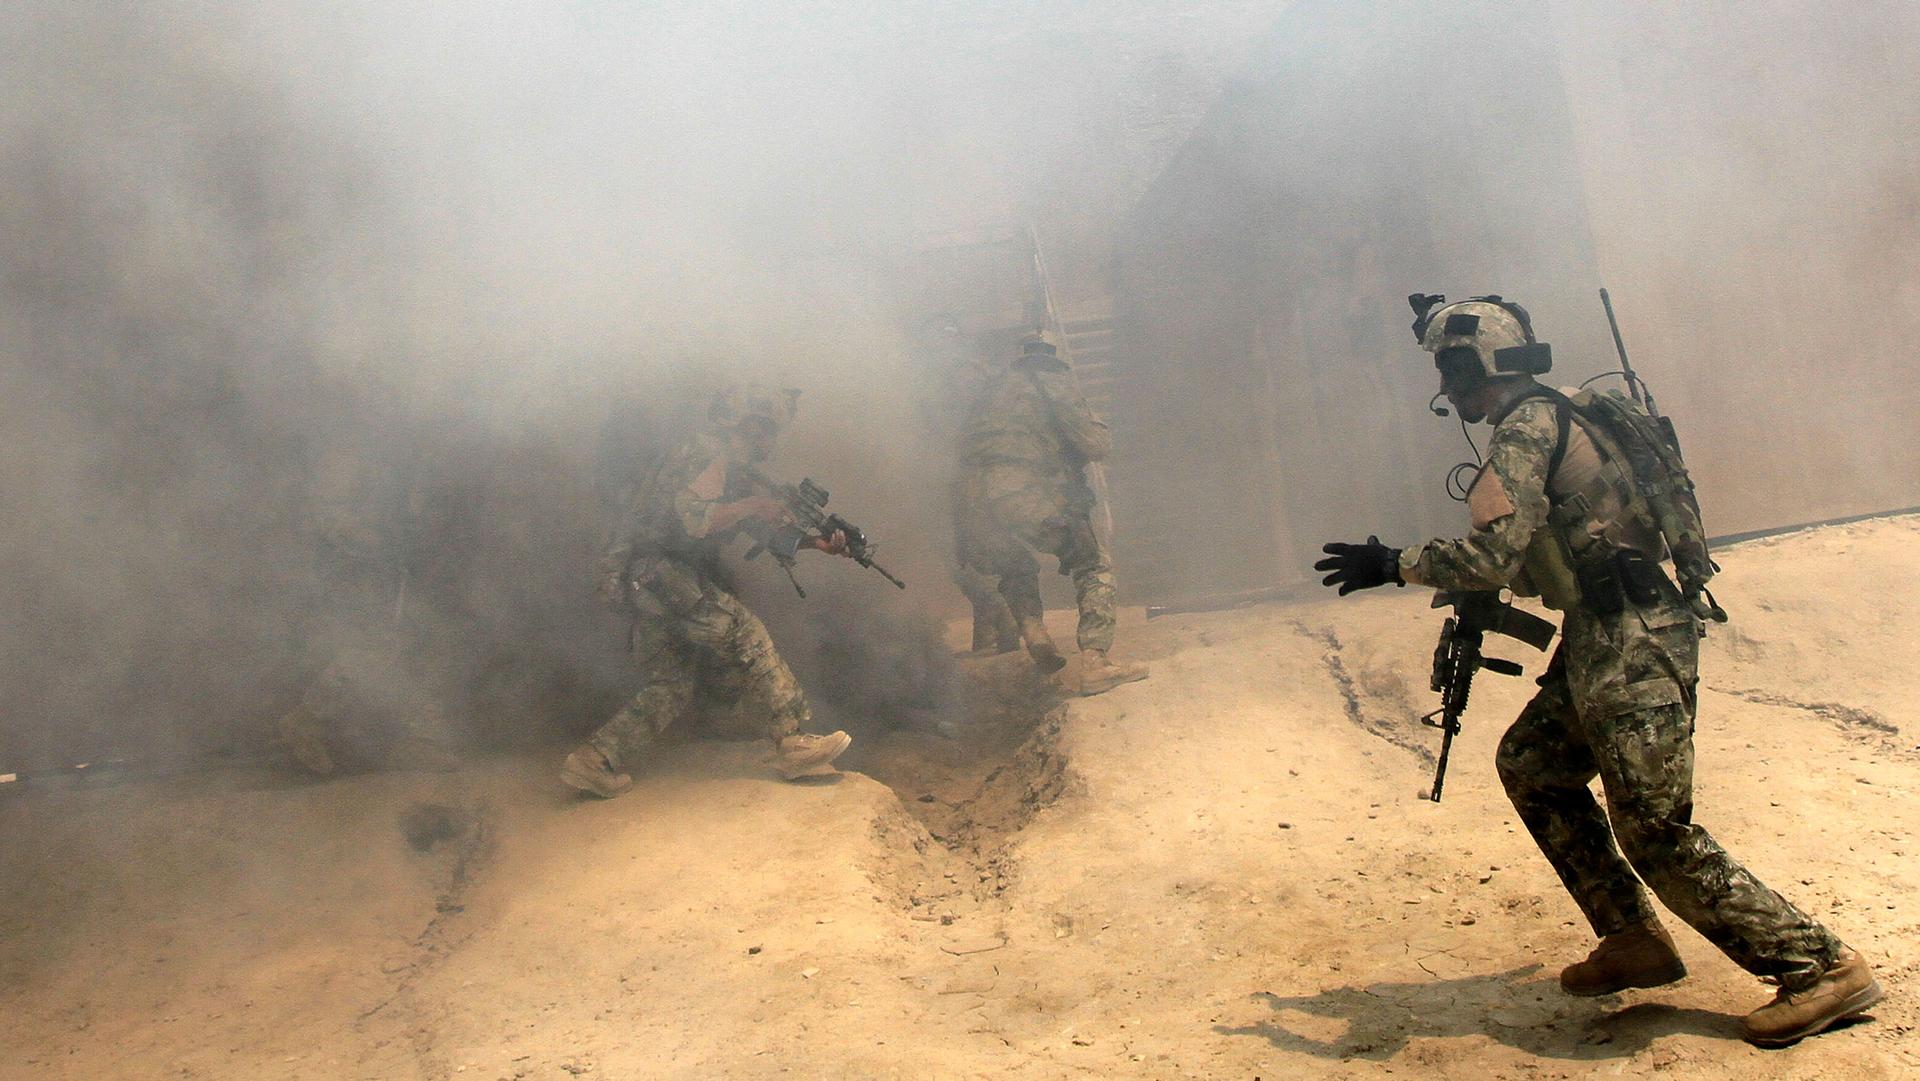 Men in military uniforms hold weapons and are walking into smoke inside building.